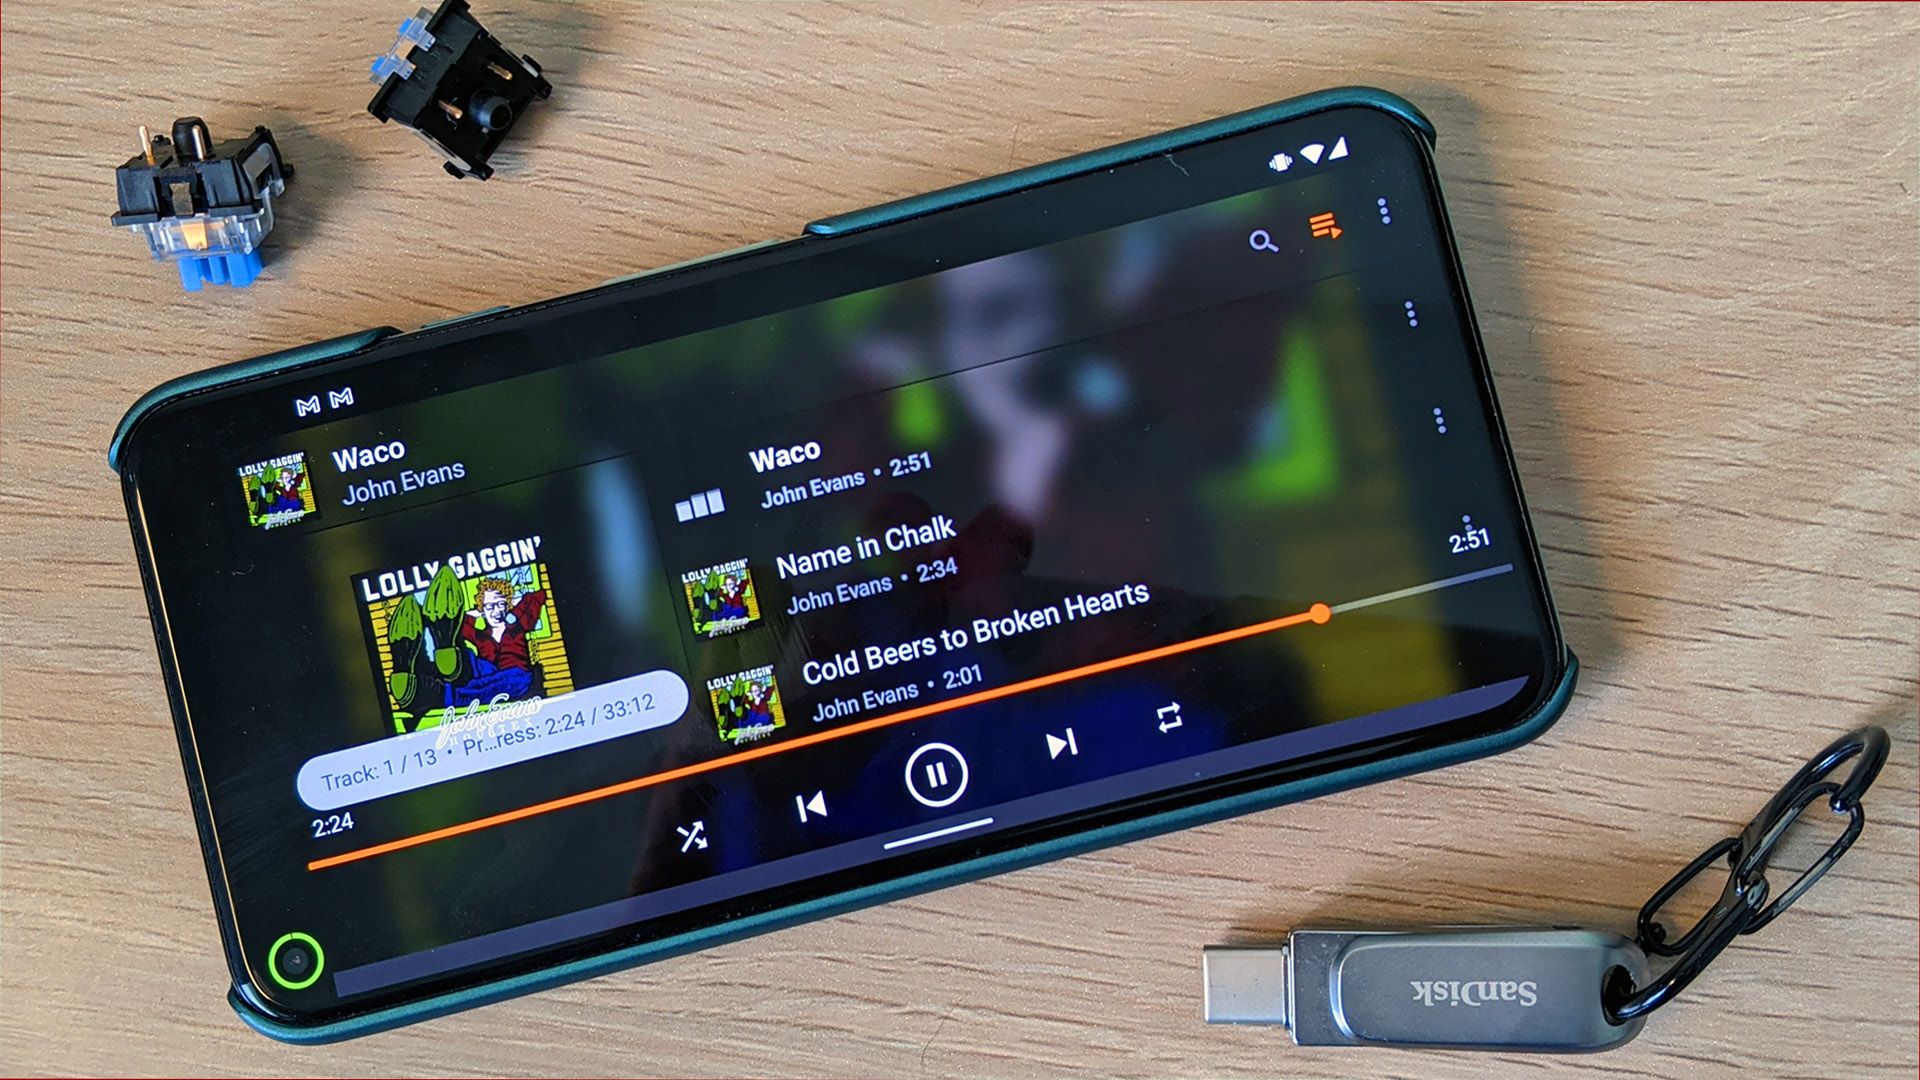 VLC media player revitalizes its Android Auto app in latest update